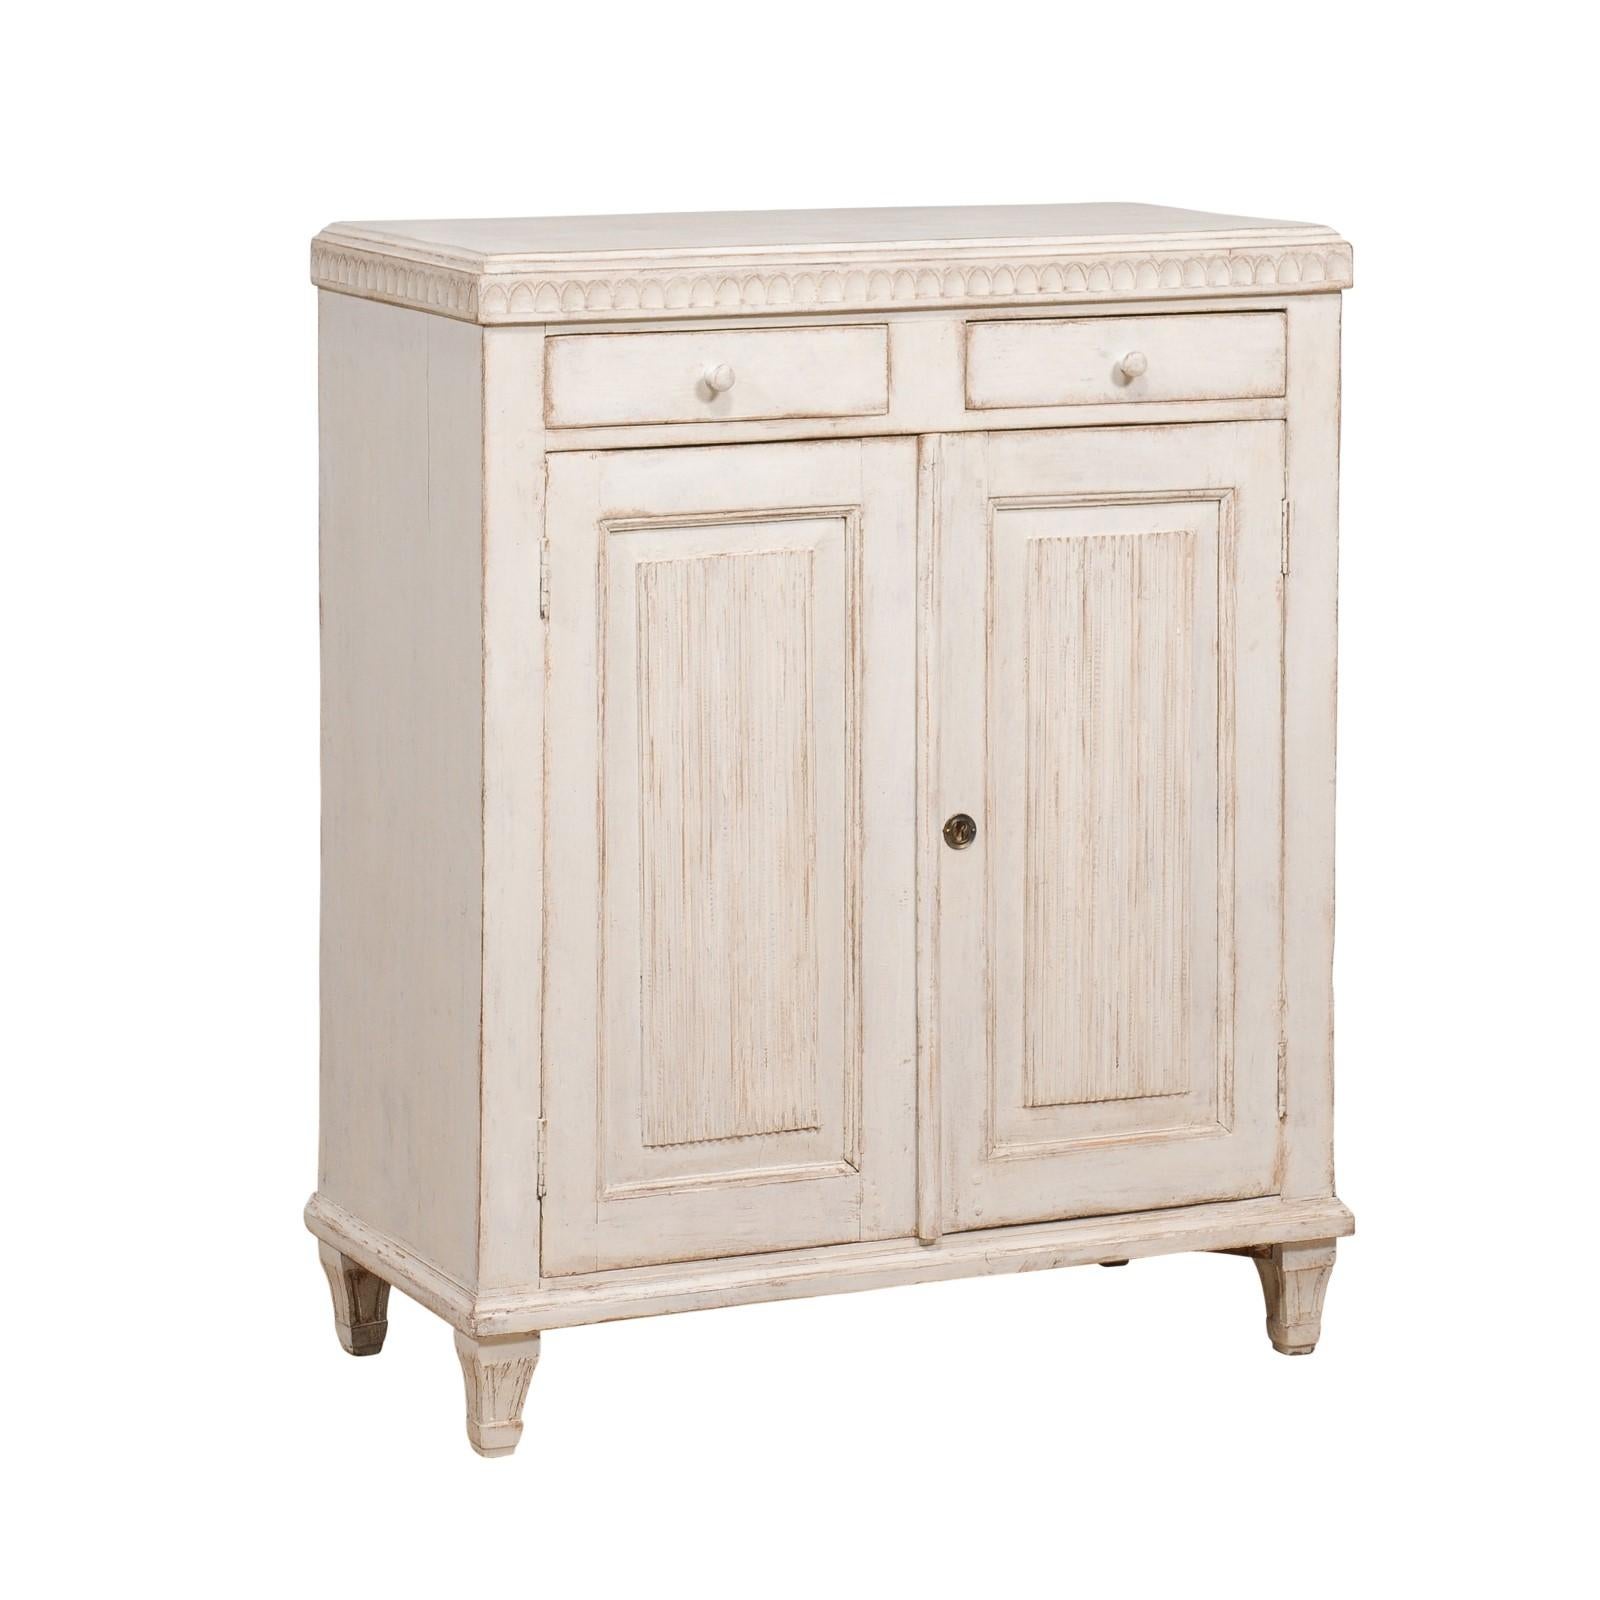 A Swedish late Gustavian period neutral light grey painted sideboard from circa 1820 with two drawers over two doors, carved molding at the top and reeded doors. Elevate your living space with the exquisite allure of this Swedish Late Gustavian